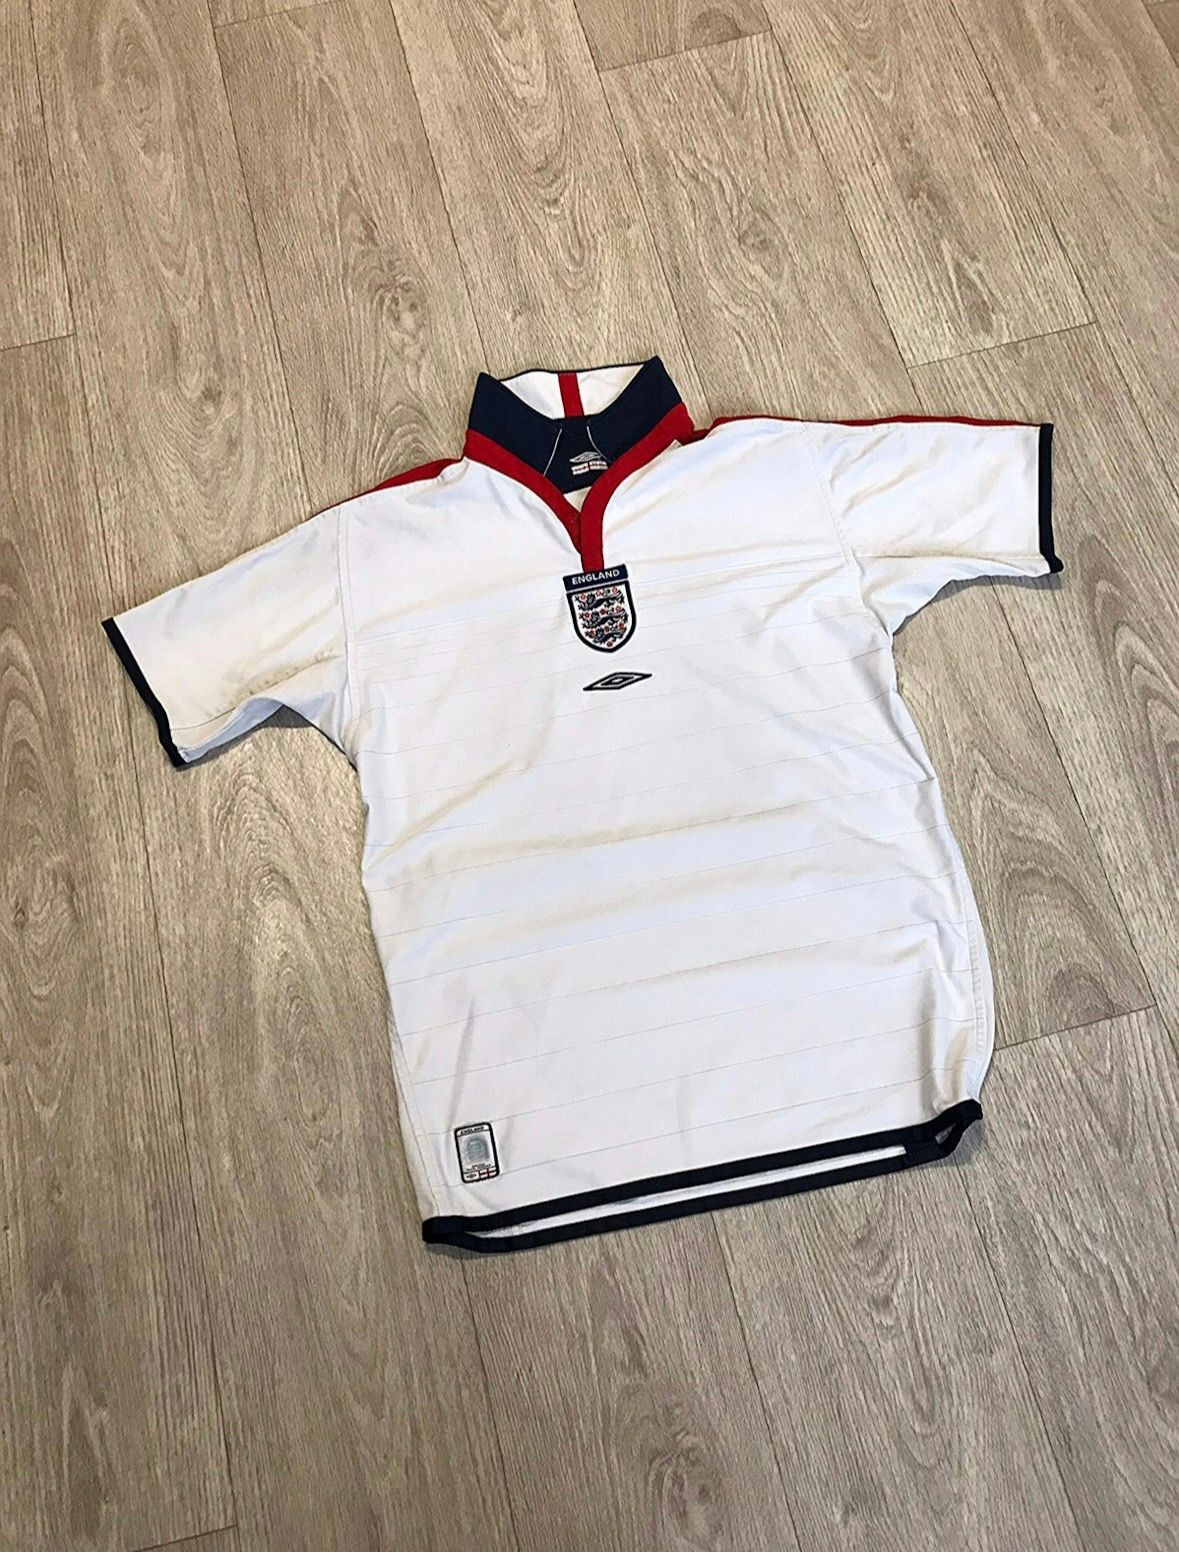 Pre-owned Soccer Jersey X Vintage Umbro England Soccer Jersey In White